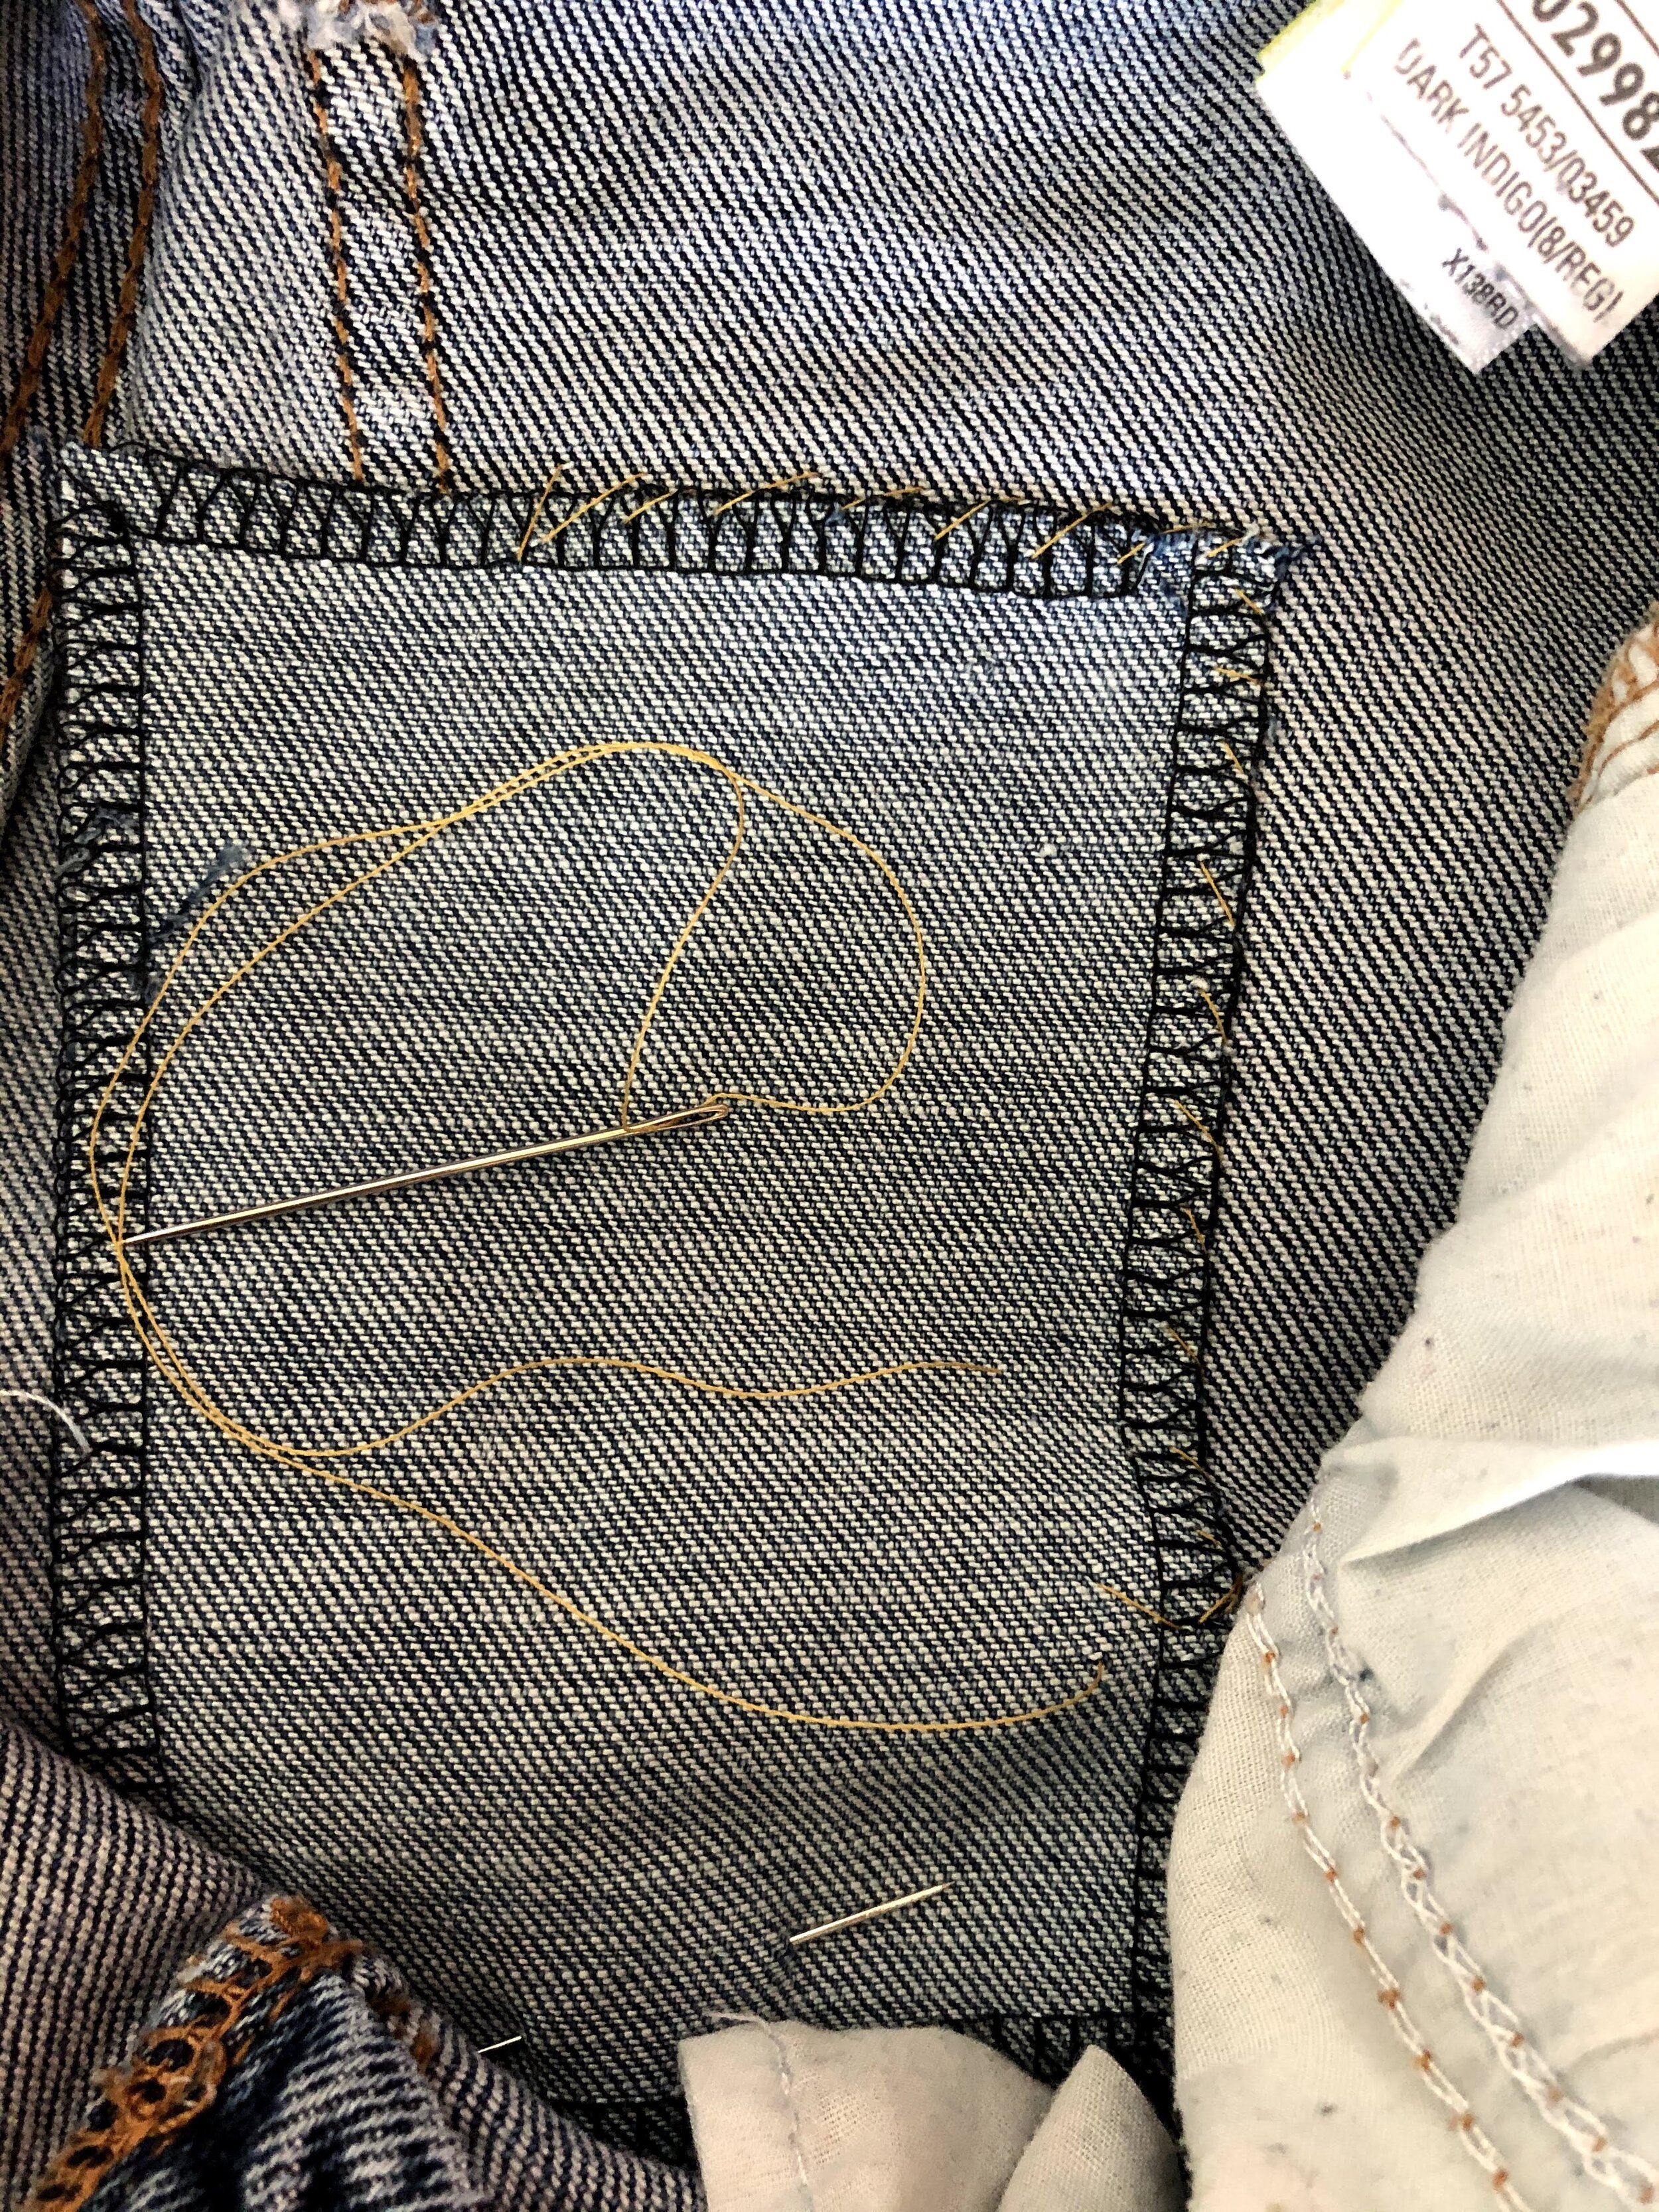 How to repair a ripped jean — Abigail Wastie